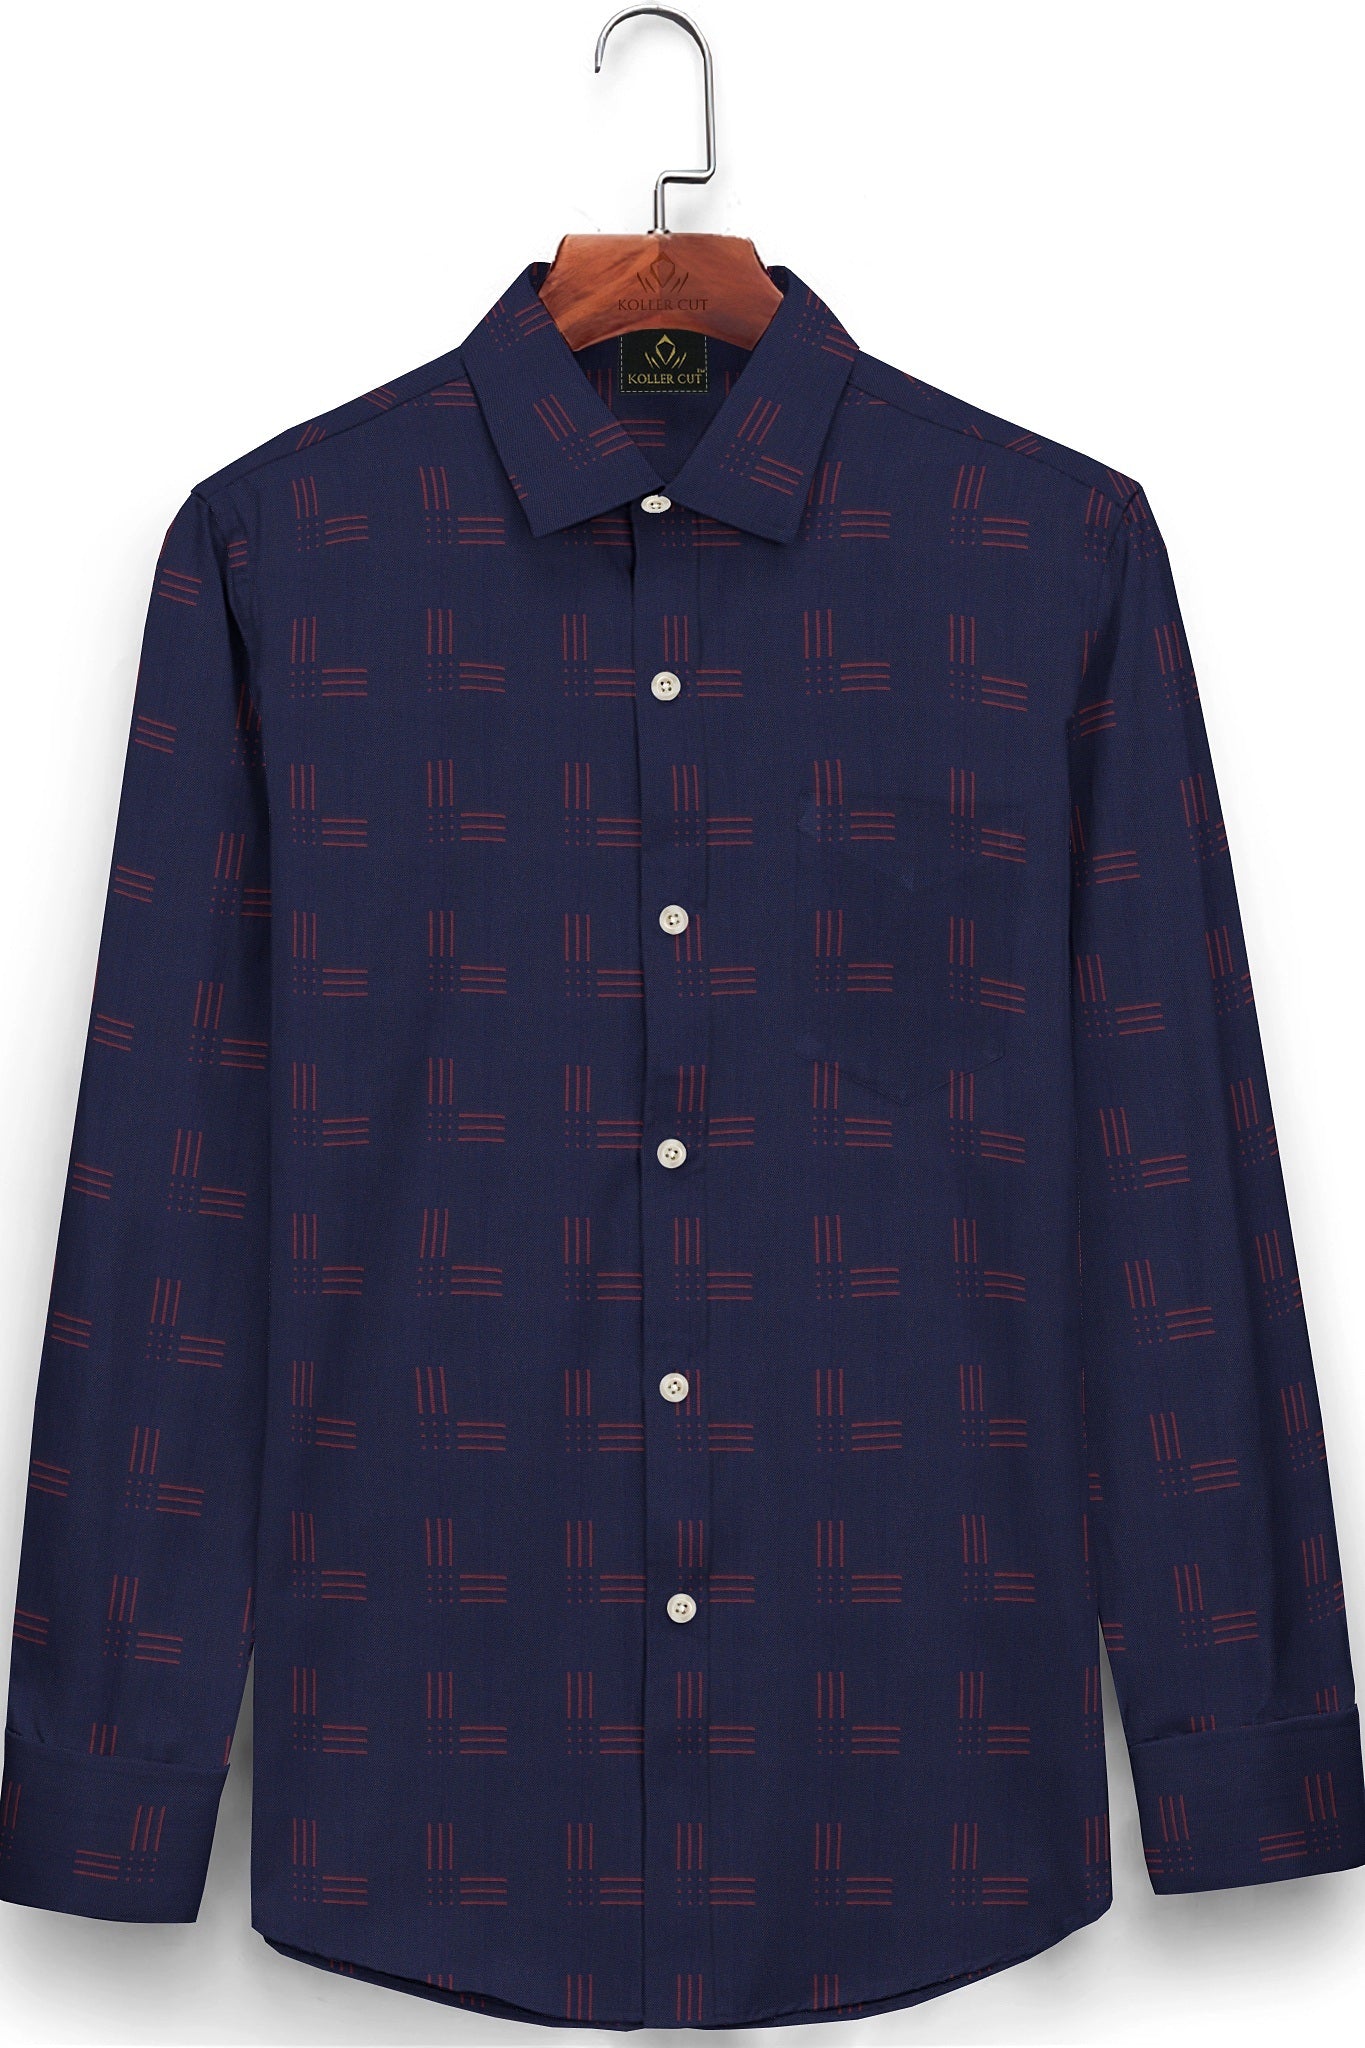 Midnight Blue with Cardinal Red Jacquard Print Two Toned Premium Cotton Shirt